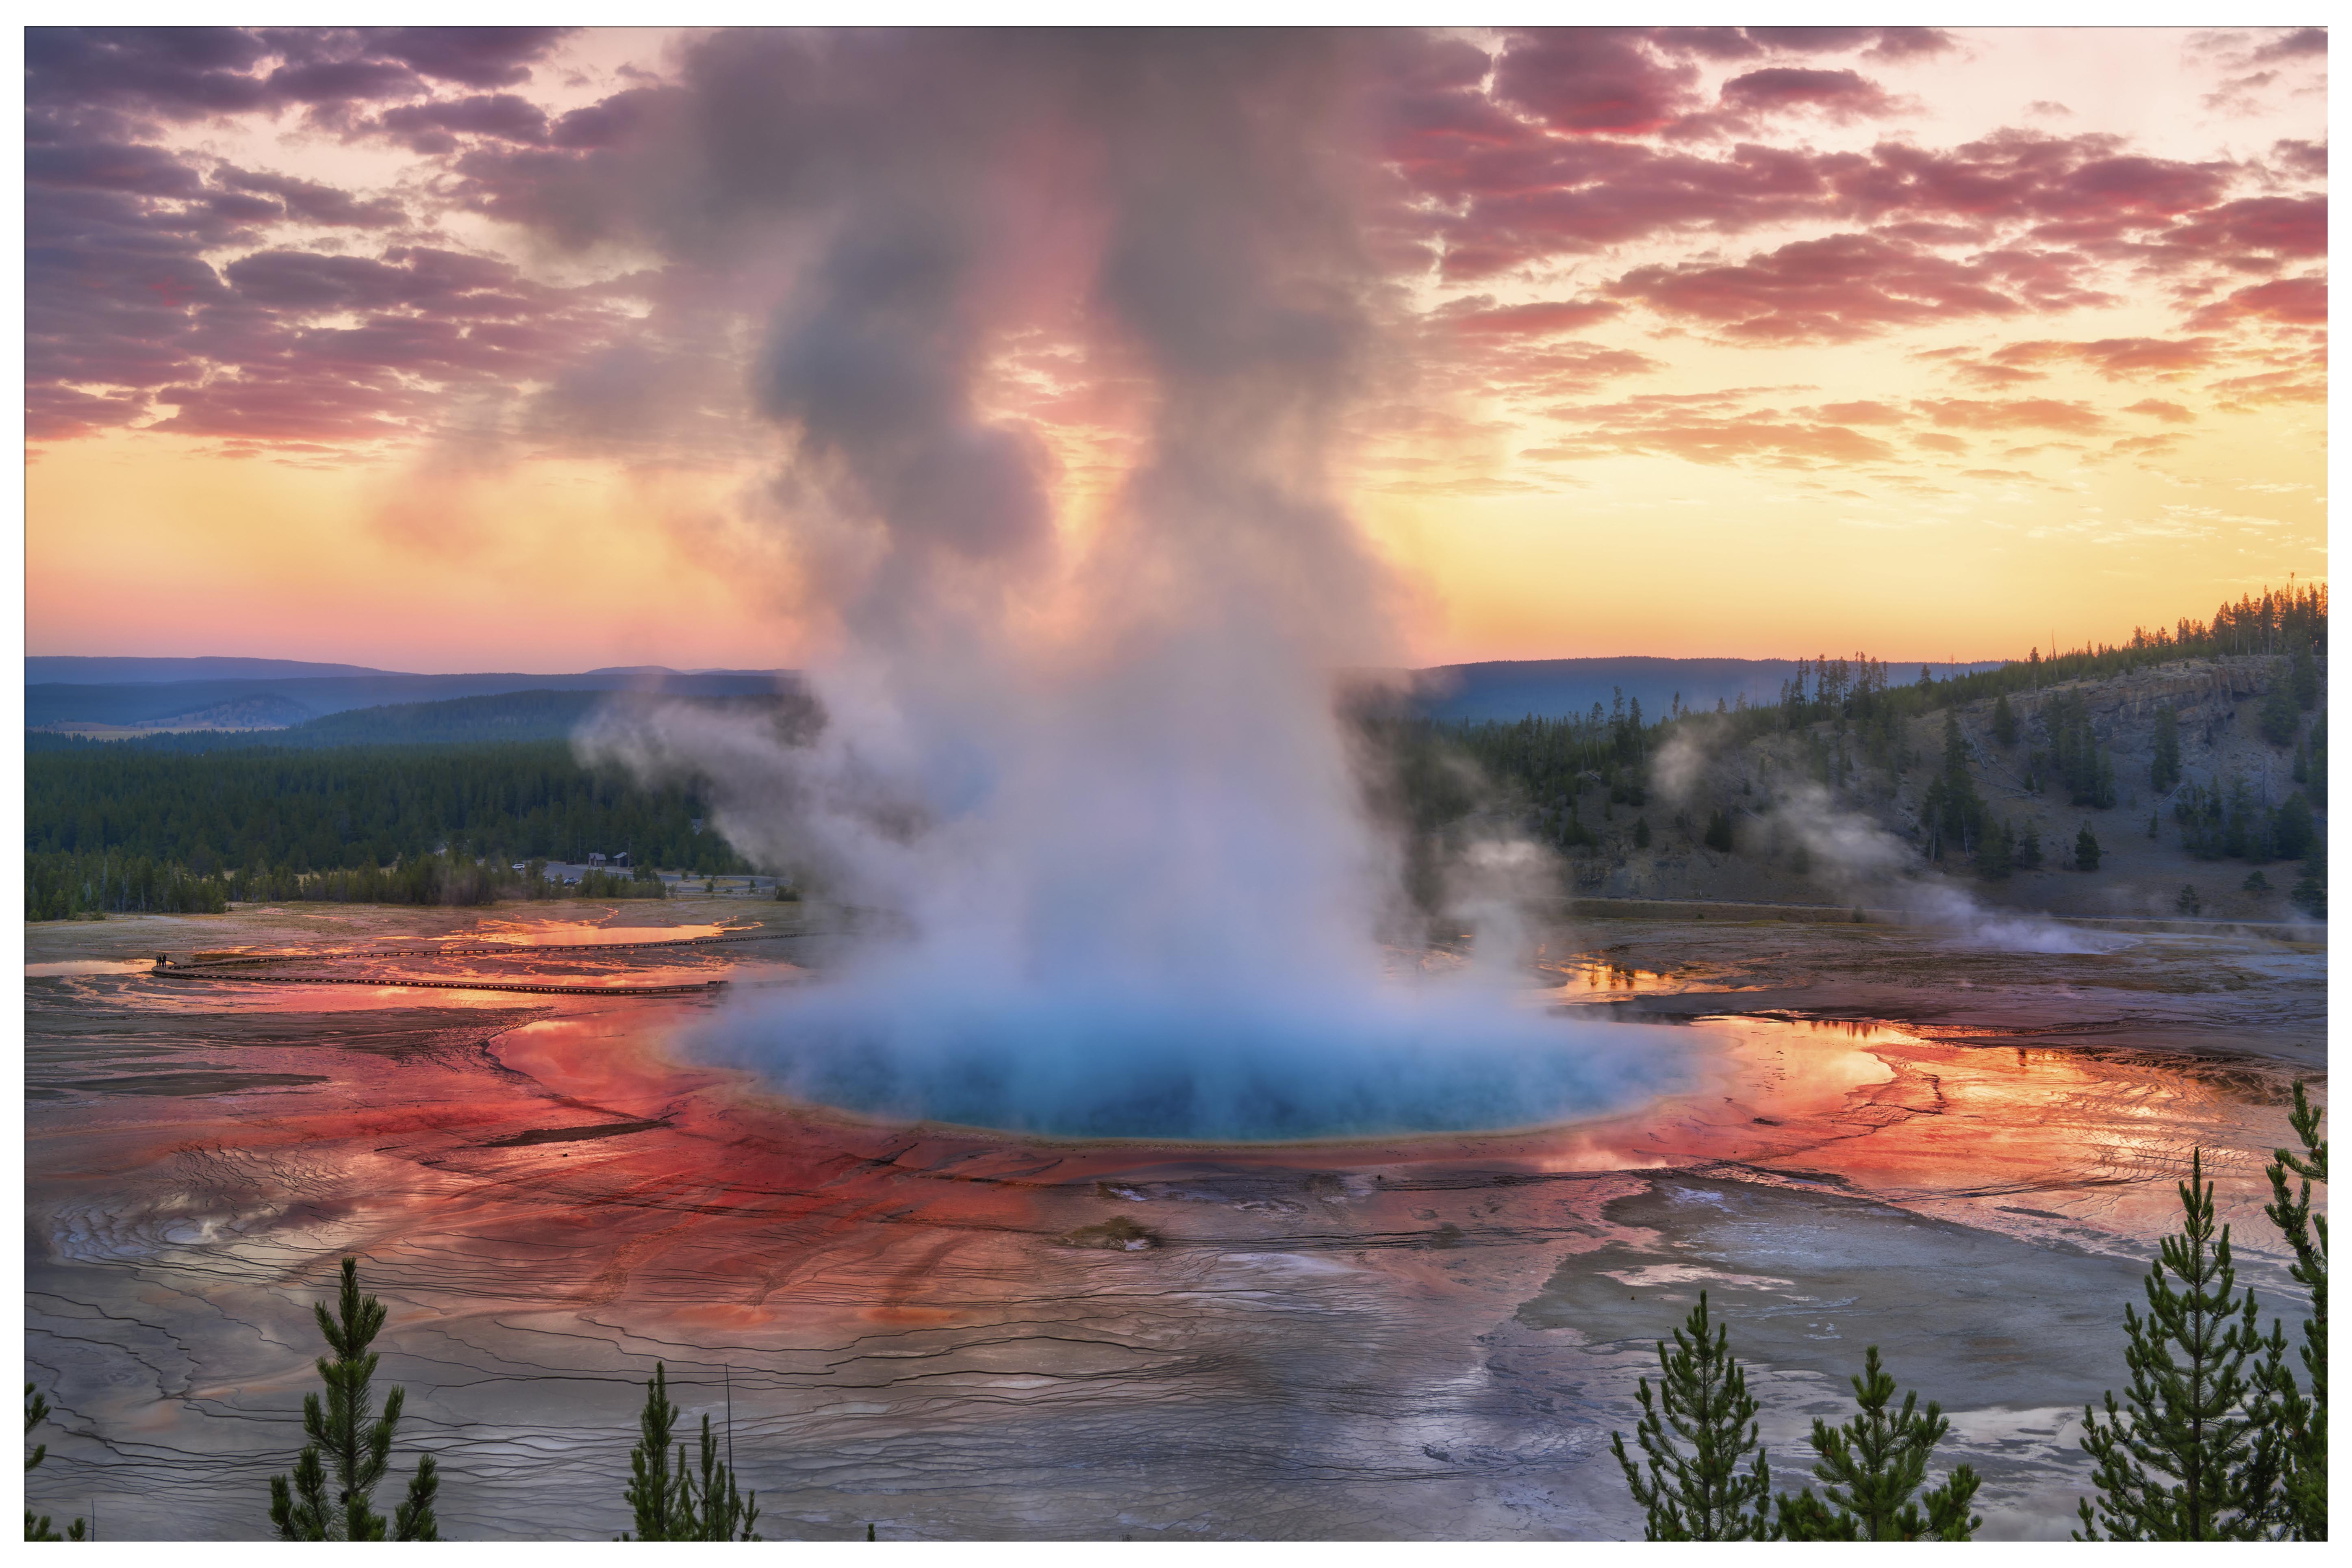 10 Amazing Instagram Photos of Yellowstone National Park in the Summer